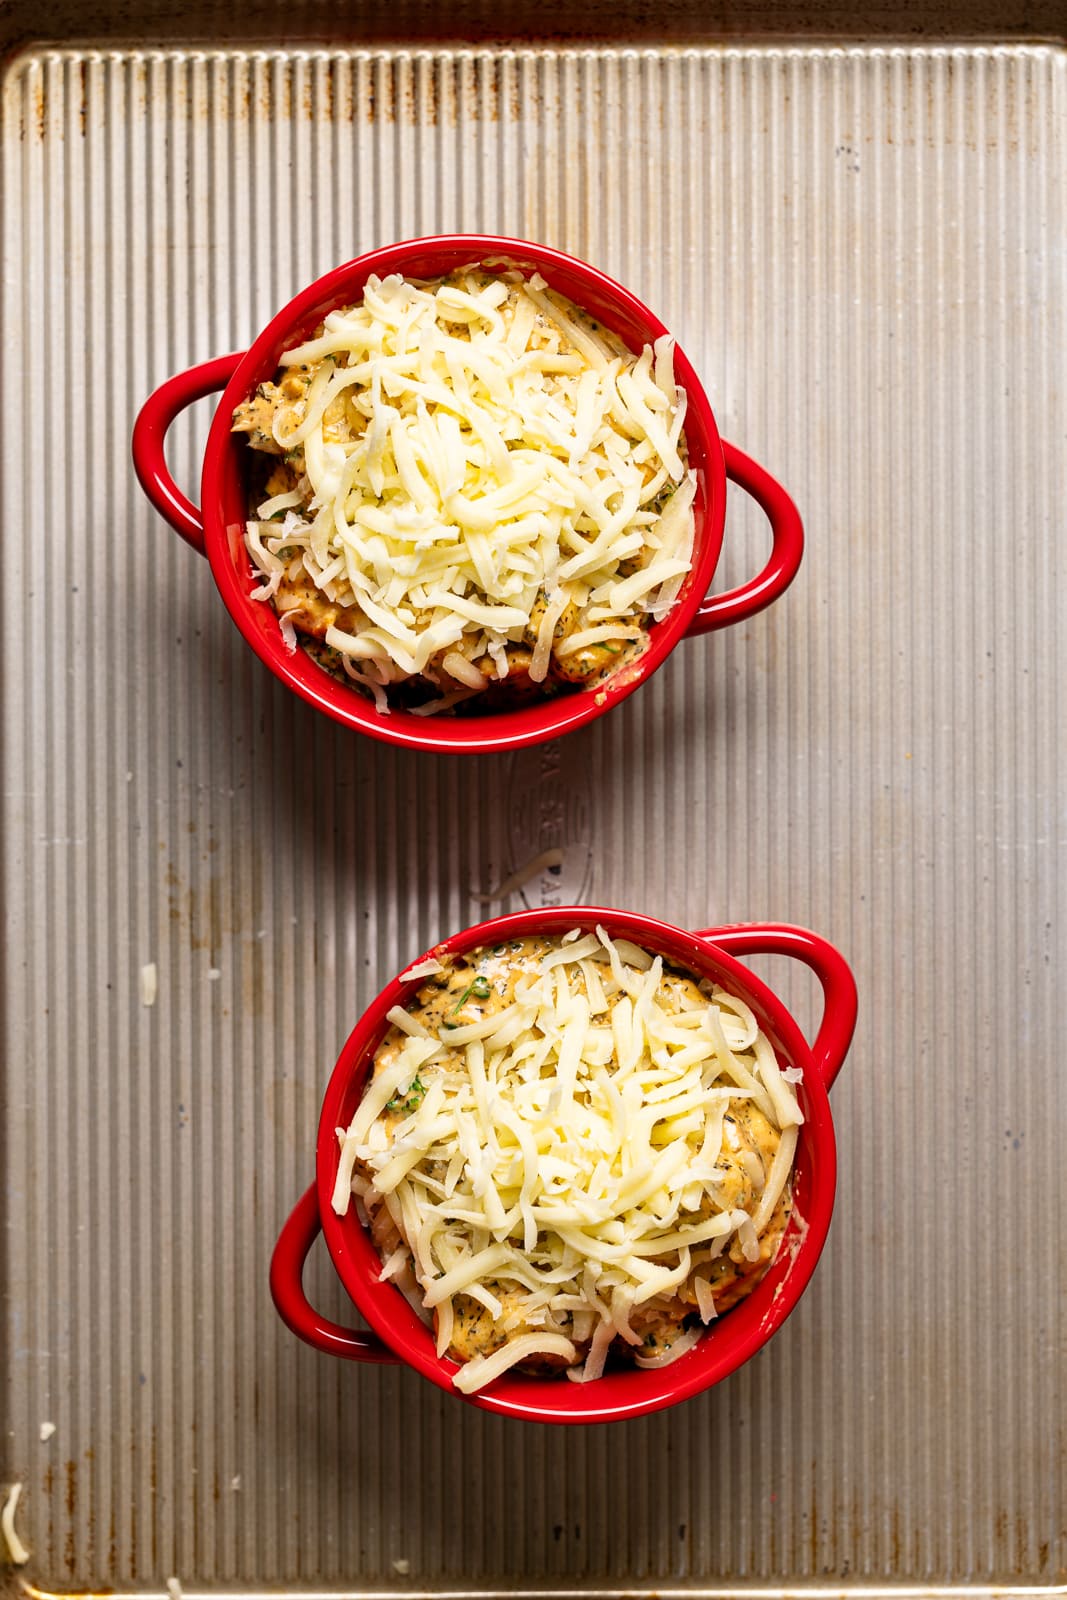 Everything in two small red bowls topped with shredded cheese on a baking sheet.